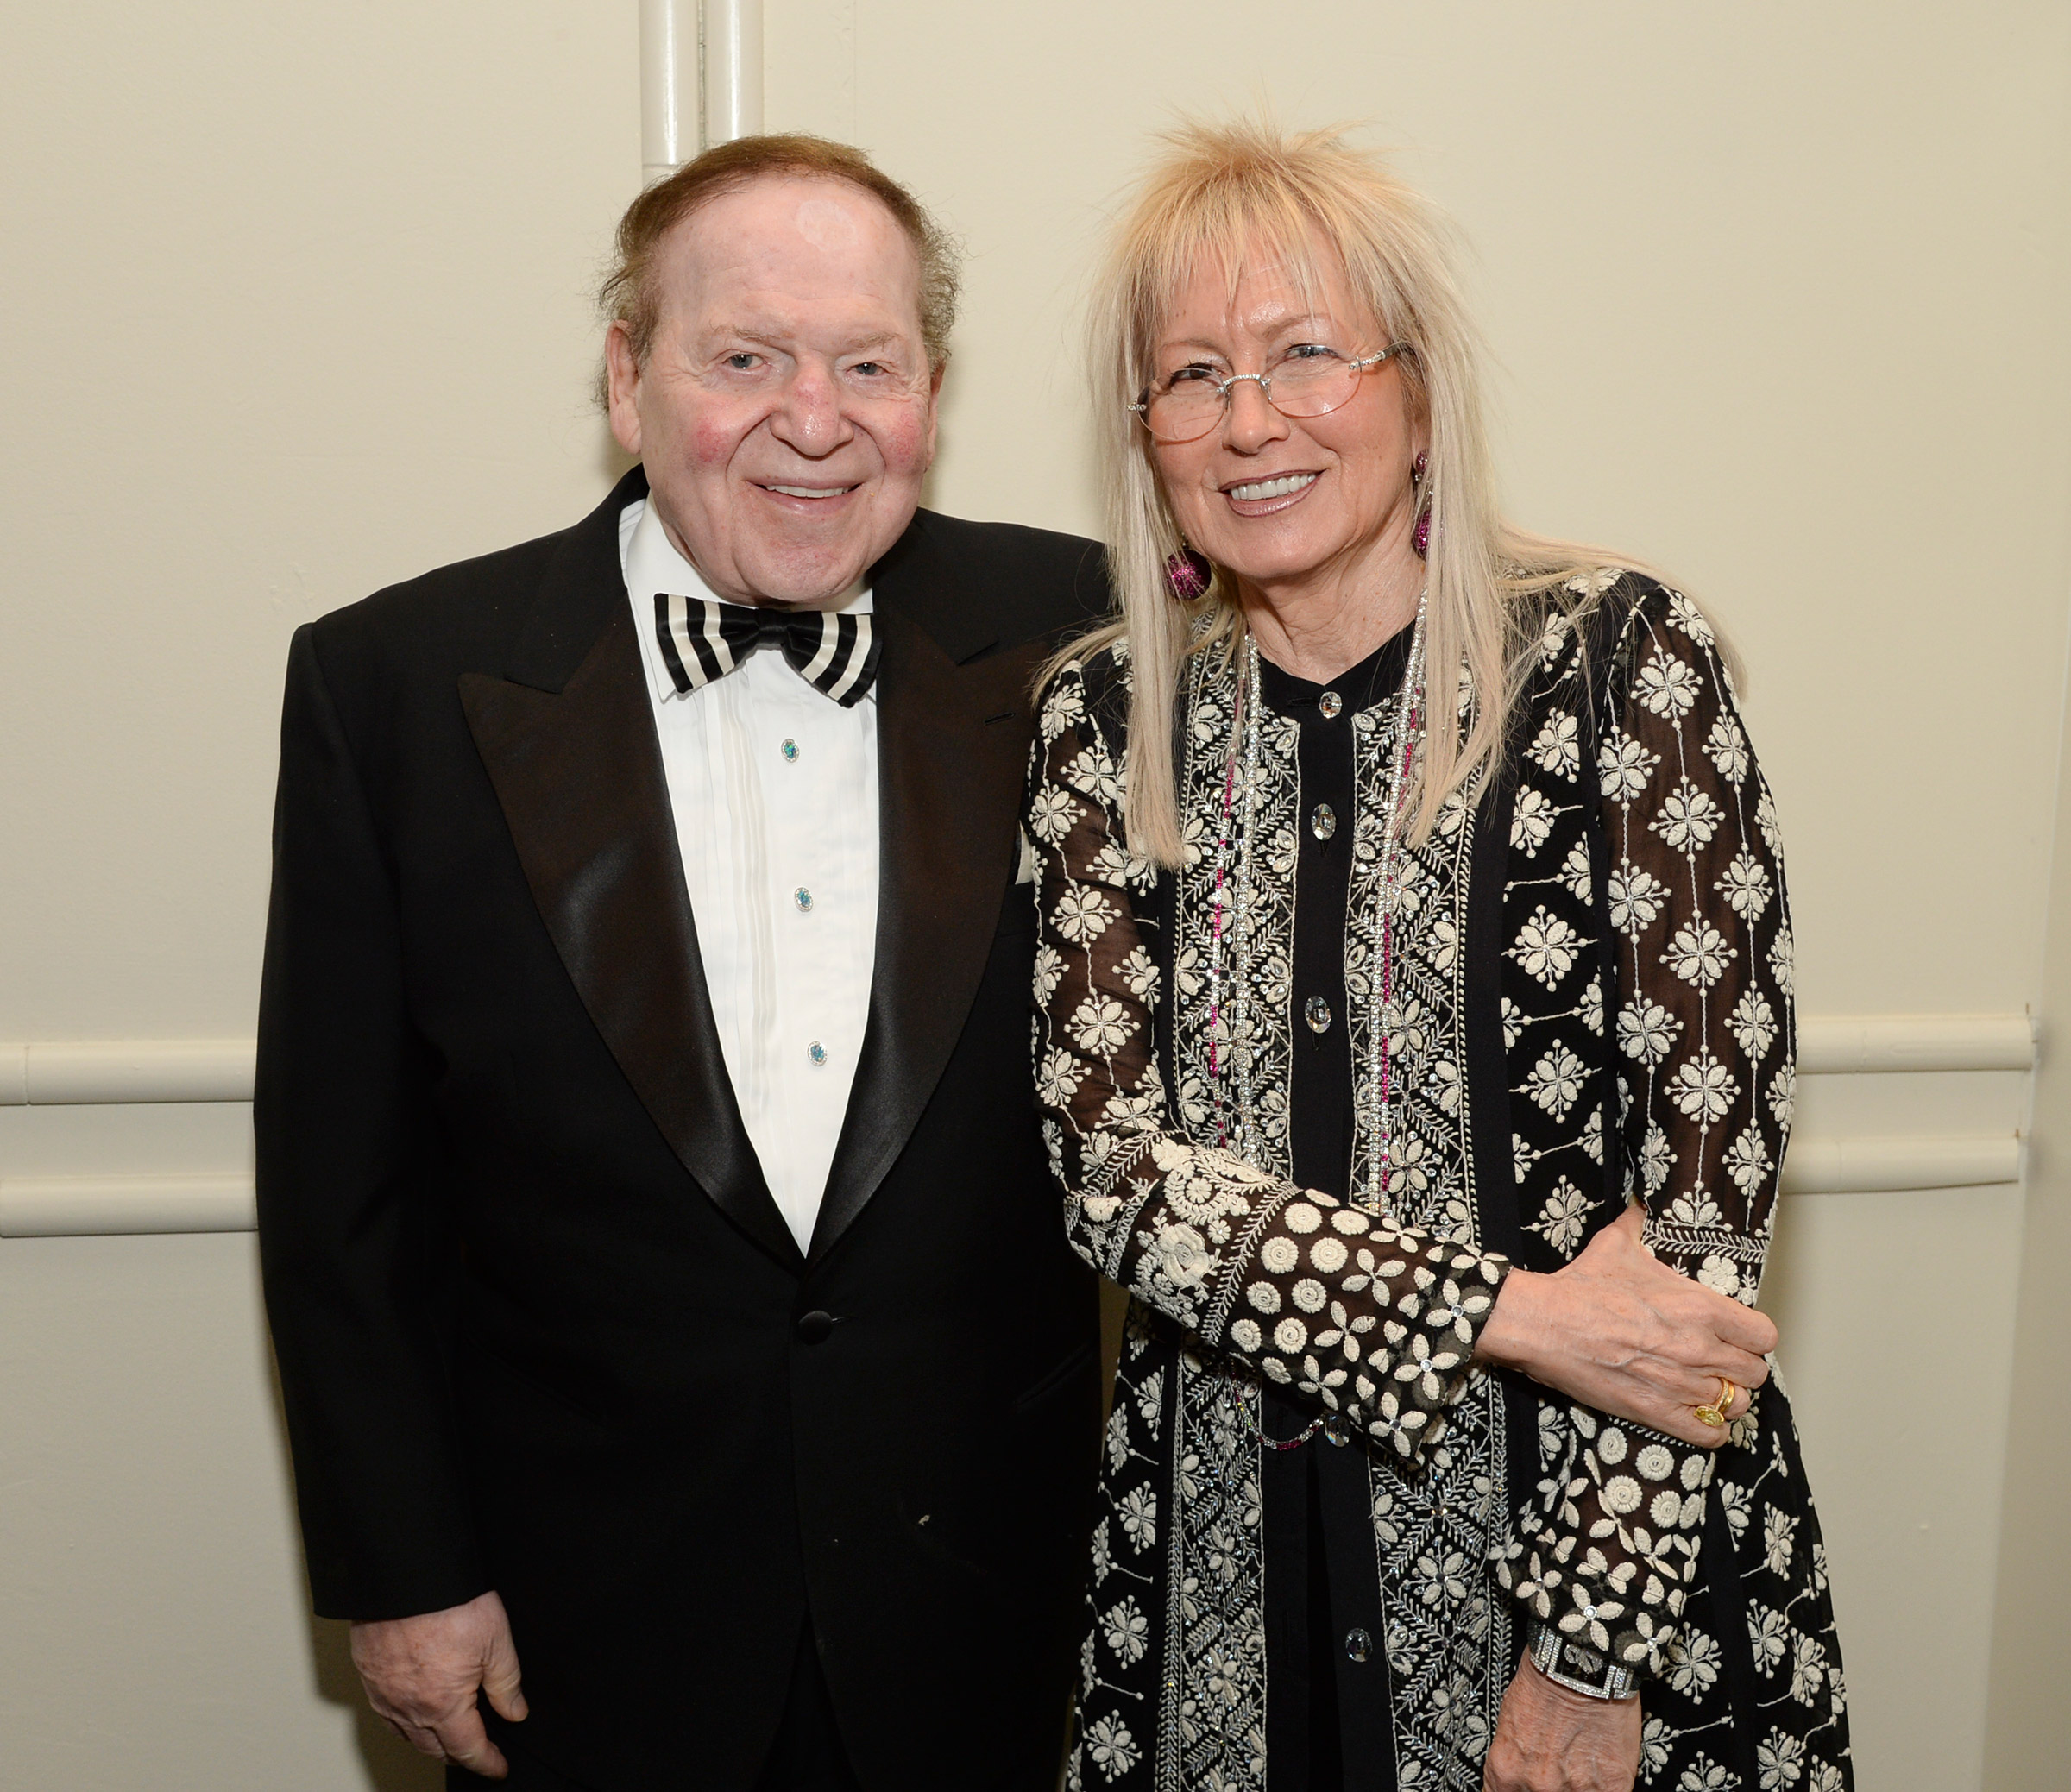 John Wayne Cancer Institute Auxiliary's 29th Annual Odyssey Ball - Inside